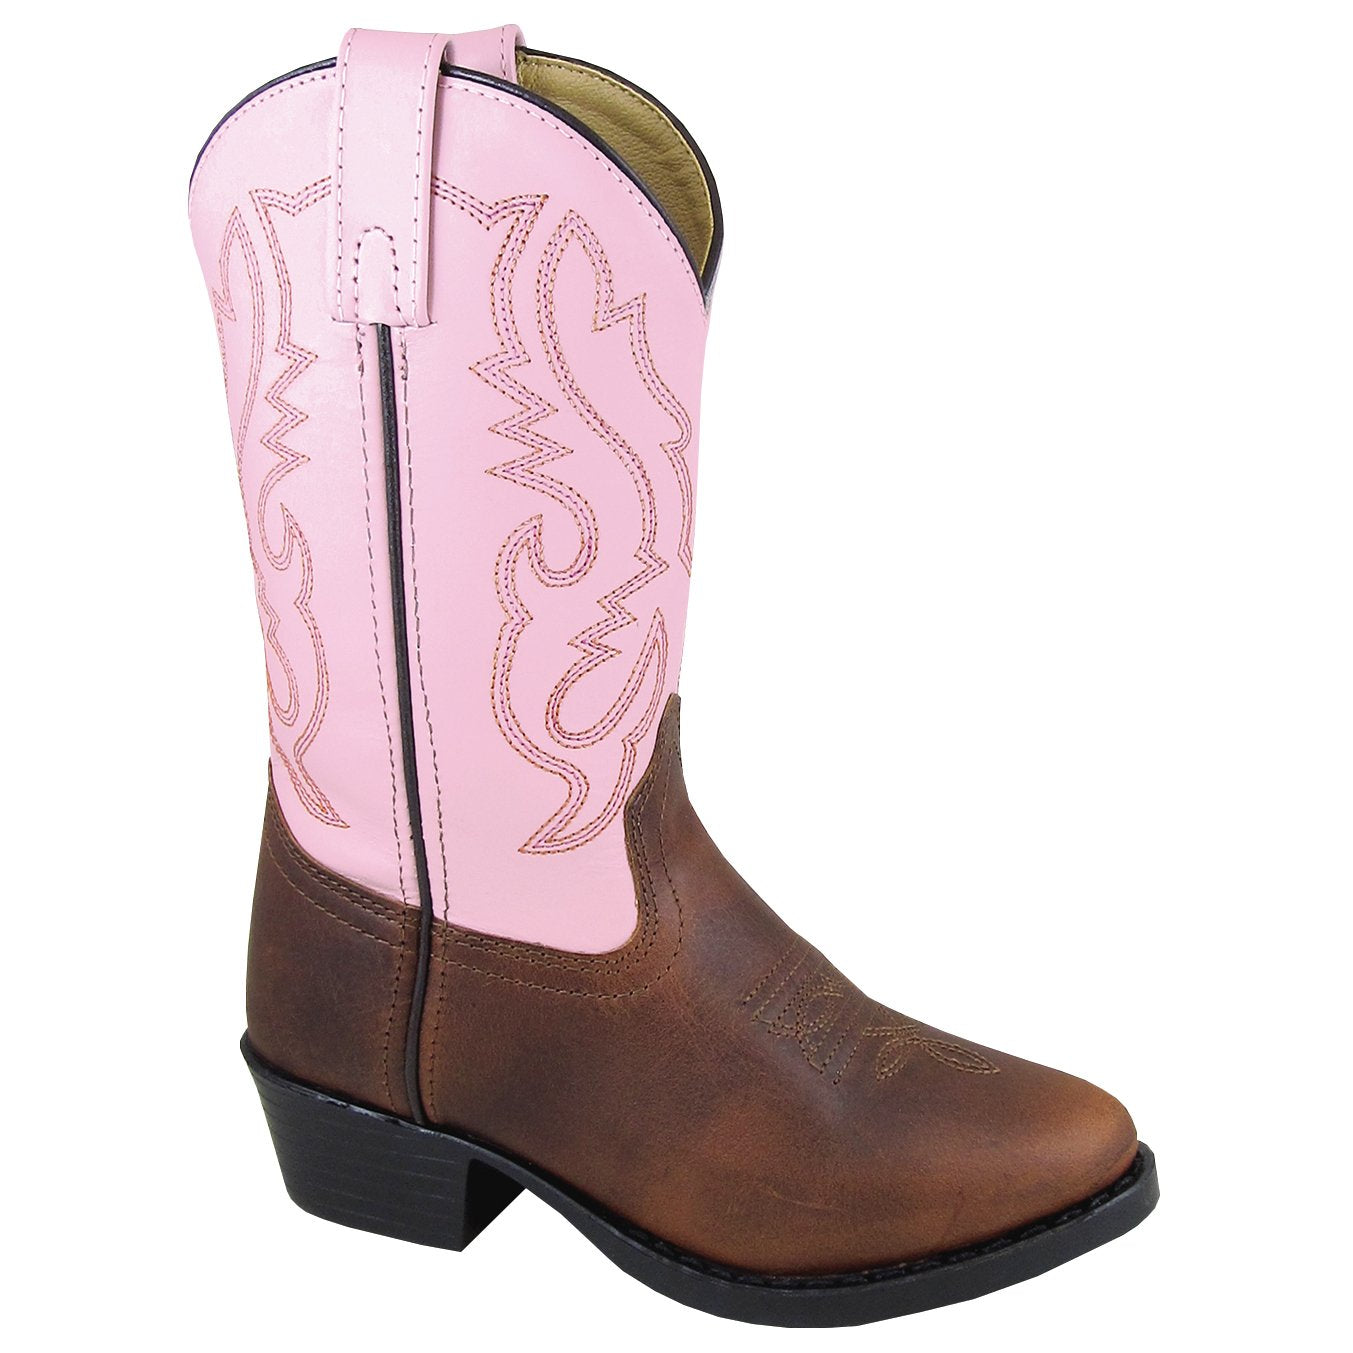 Smoky Mountain Girl's Youth Denver Brown Pink Cowboy Boot